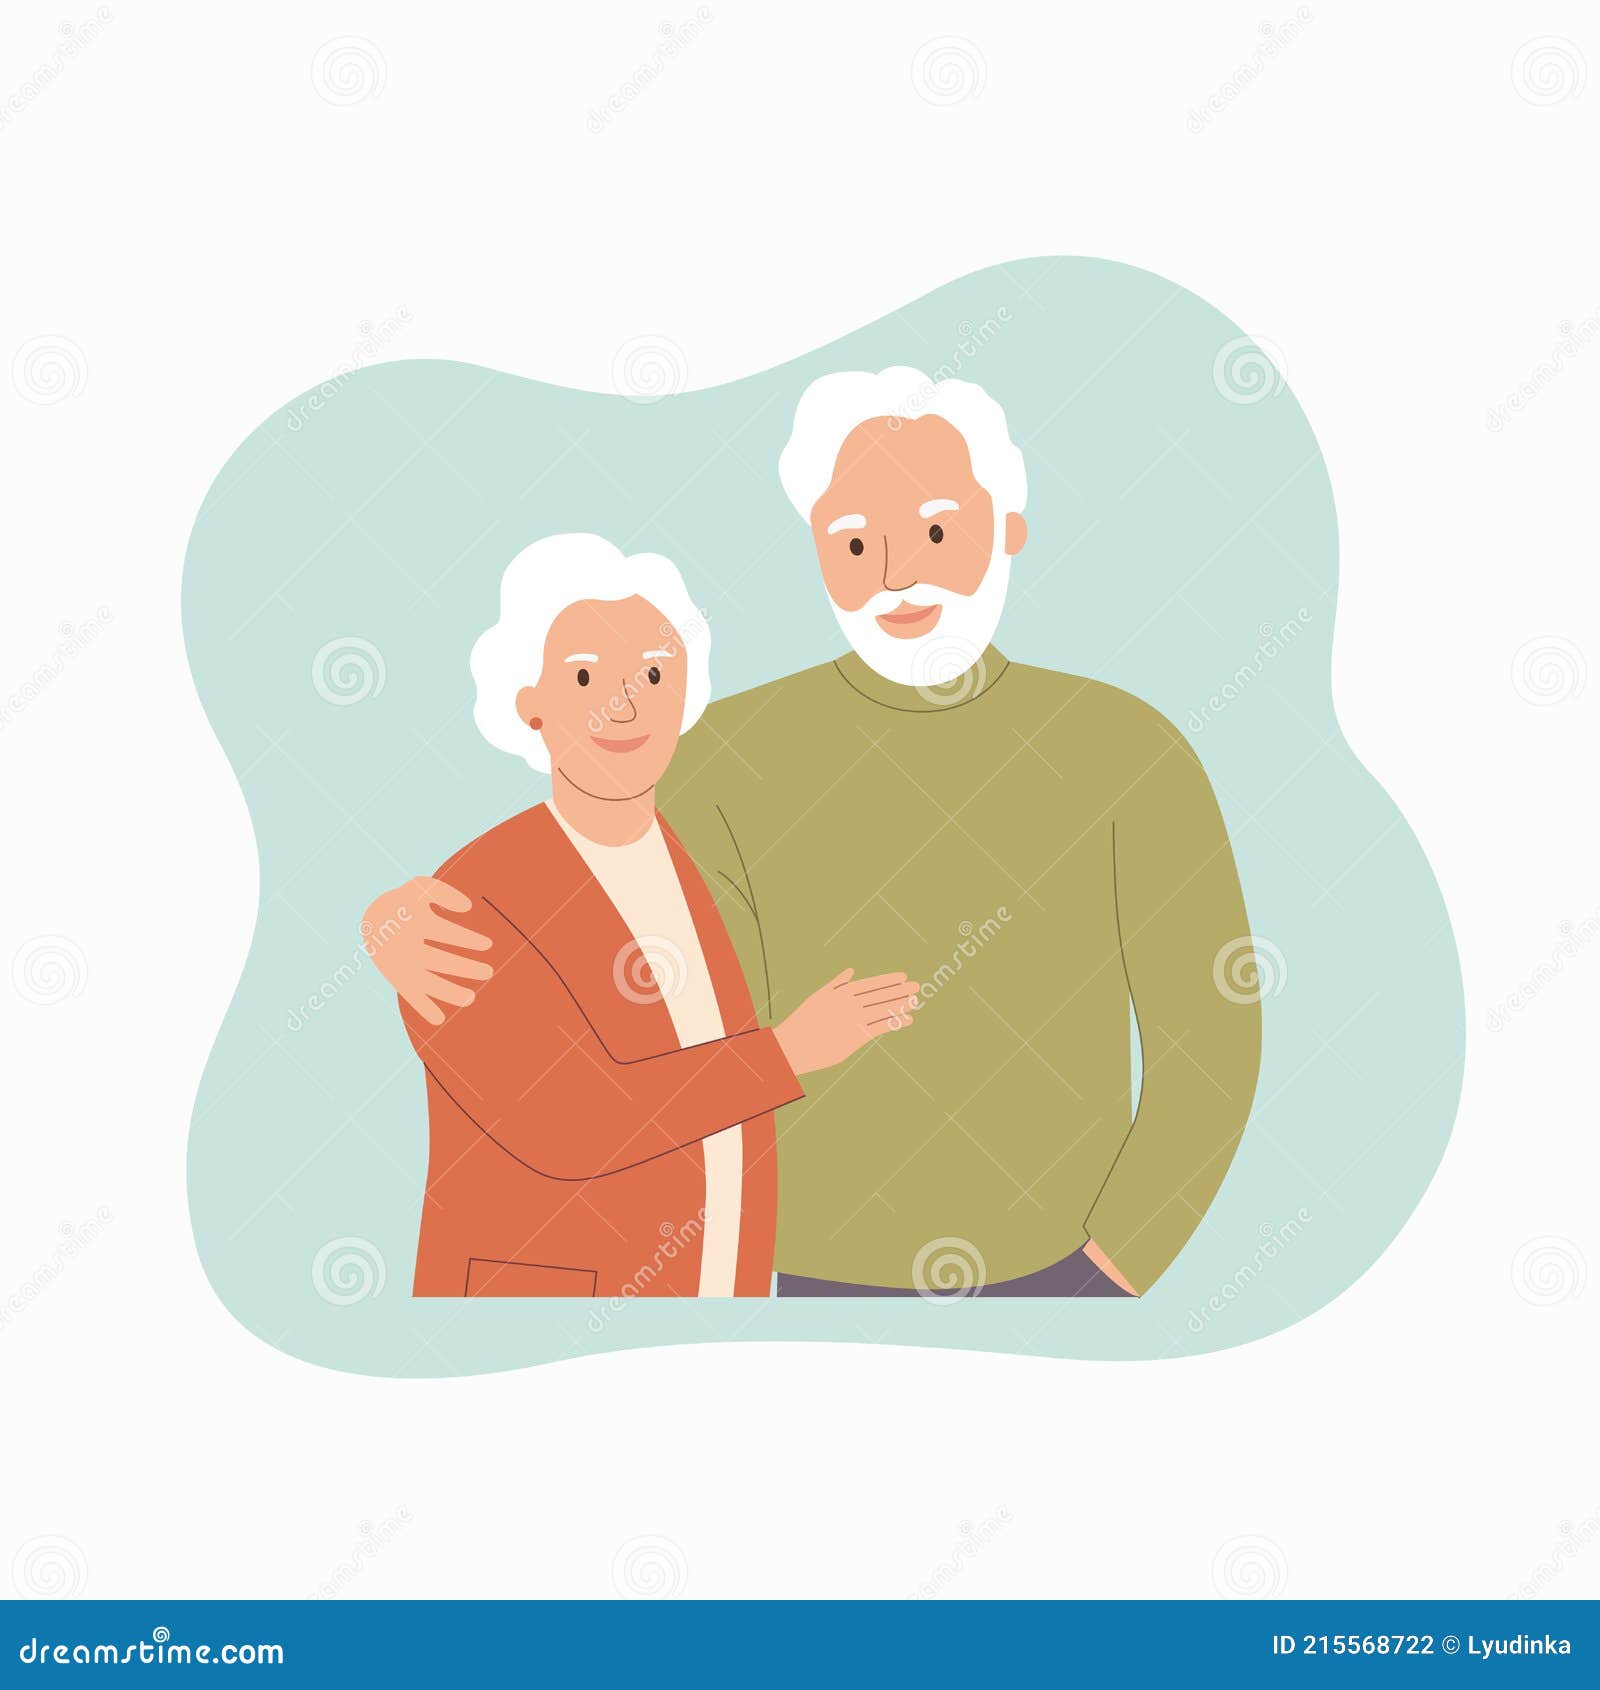 Elderly Woman and Man Isolated. Stock Vector - Illustration of love ...